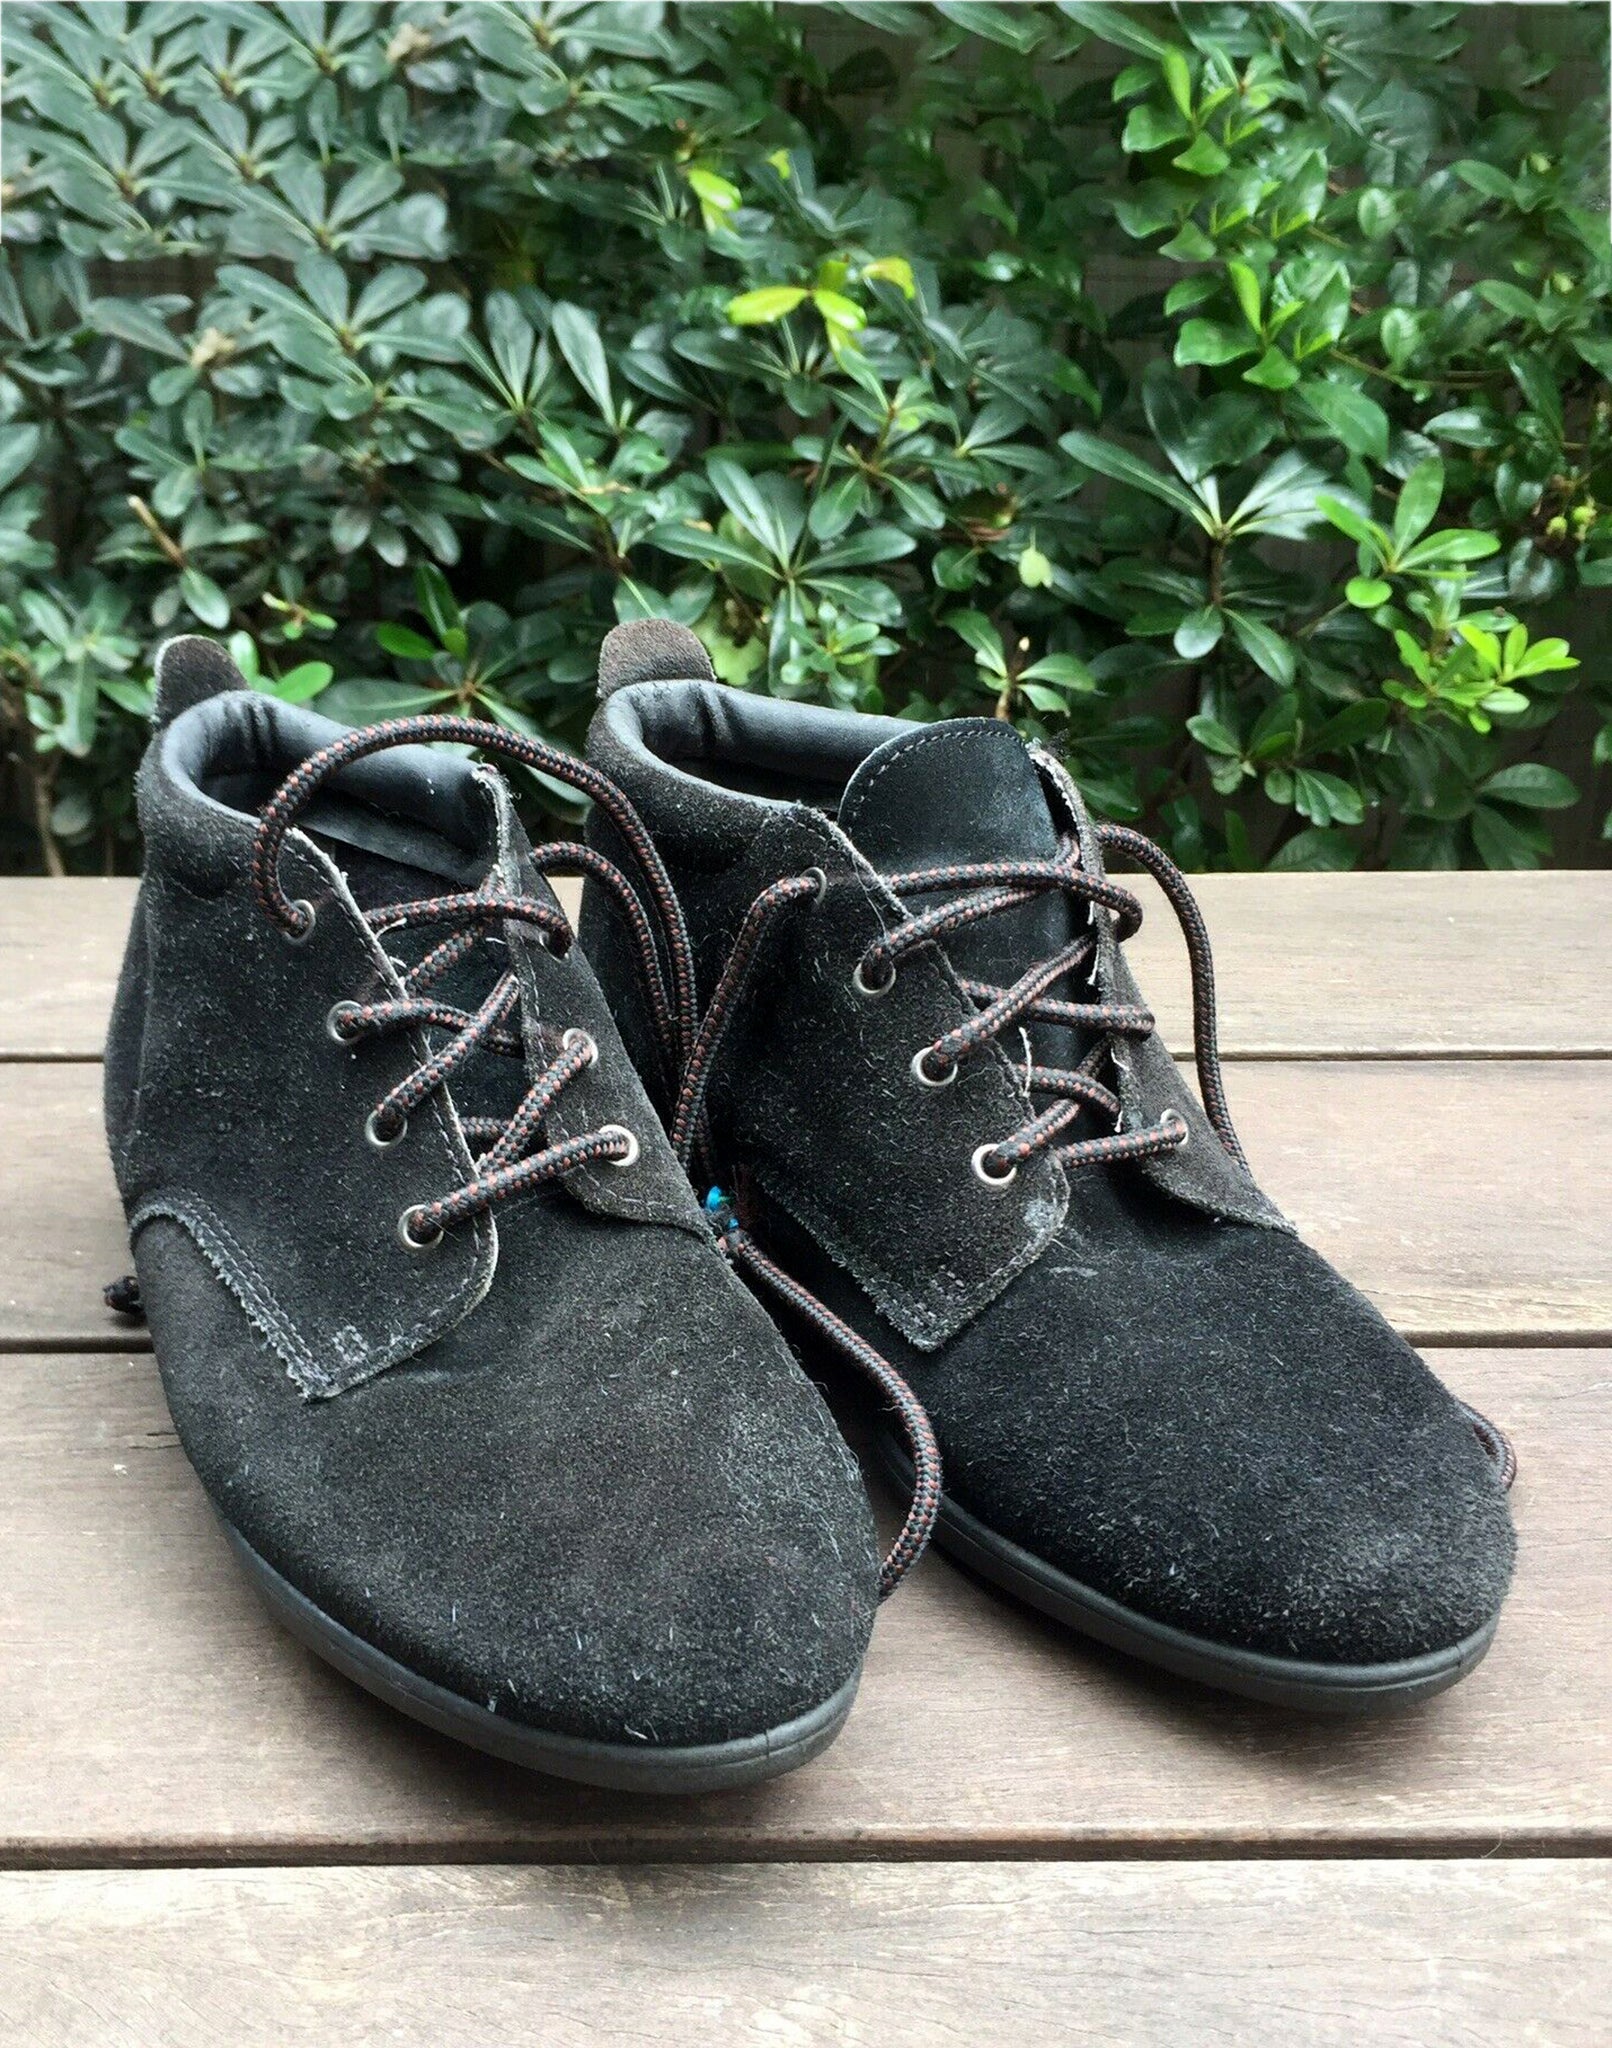 Vintage 90's Black Suede Airstep Ankle Boots - Size 7